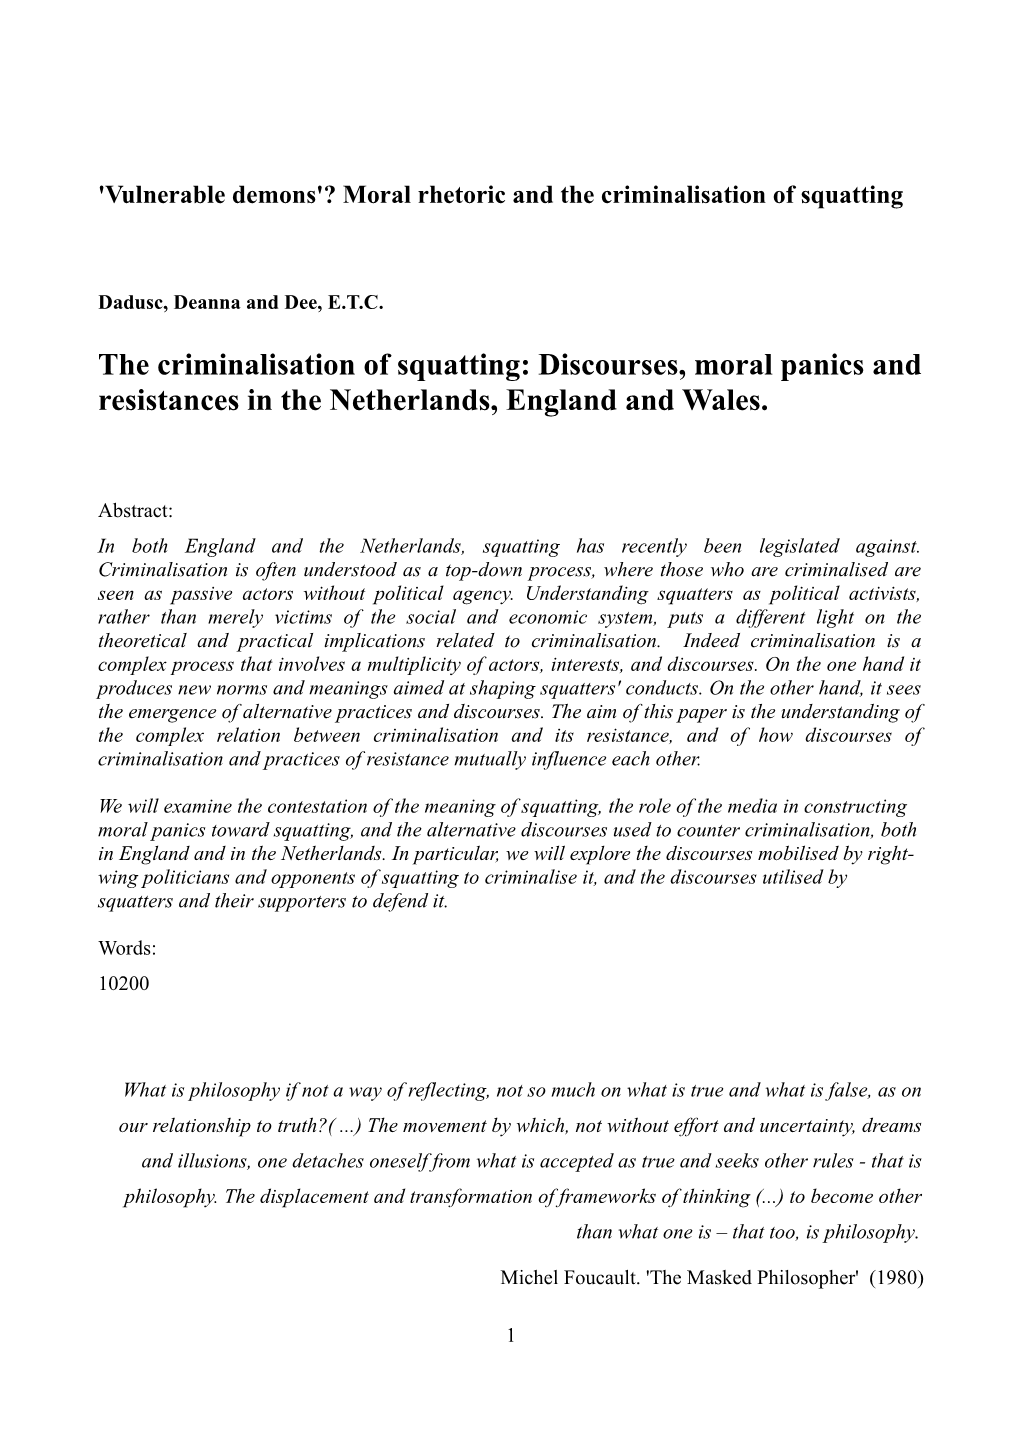 The Criminalisation of Squatting: Discourses, Moral Panics and Resistances in the Netherlands, England and Wales